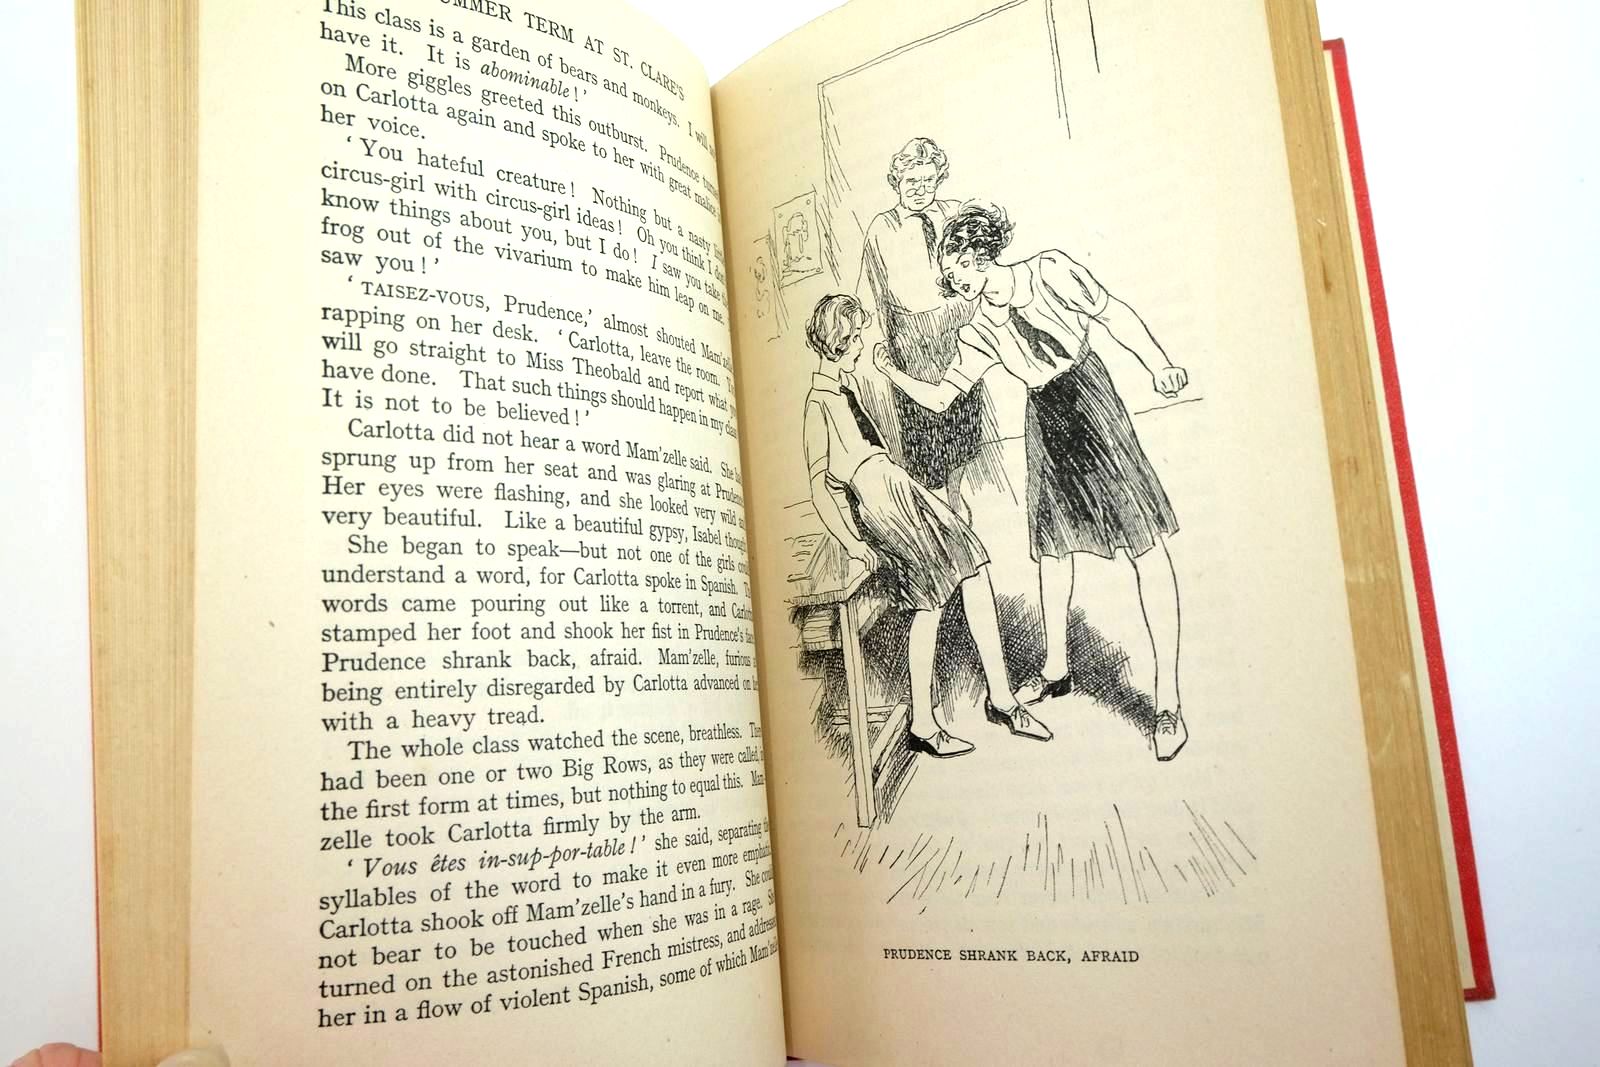 Photo of SUMMER TERM AT ST. CLARE'S written by Blyton, Enid illustrated by Cable, W. Lindsay published by Methuen & Co. Ltd. (STOCK CODE: 2135773)  for sale by Stella & Rose's Books